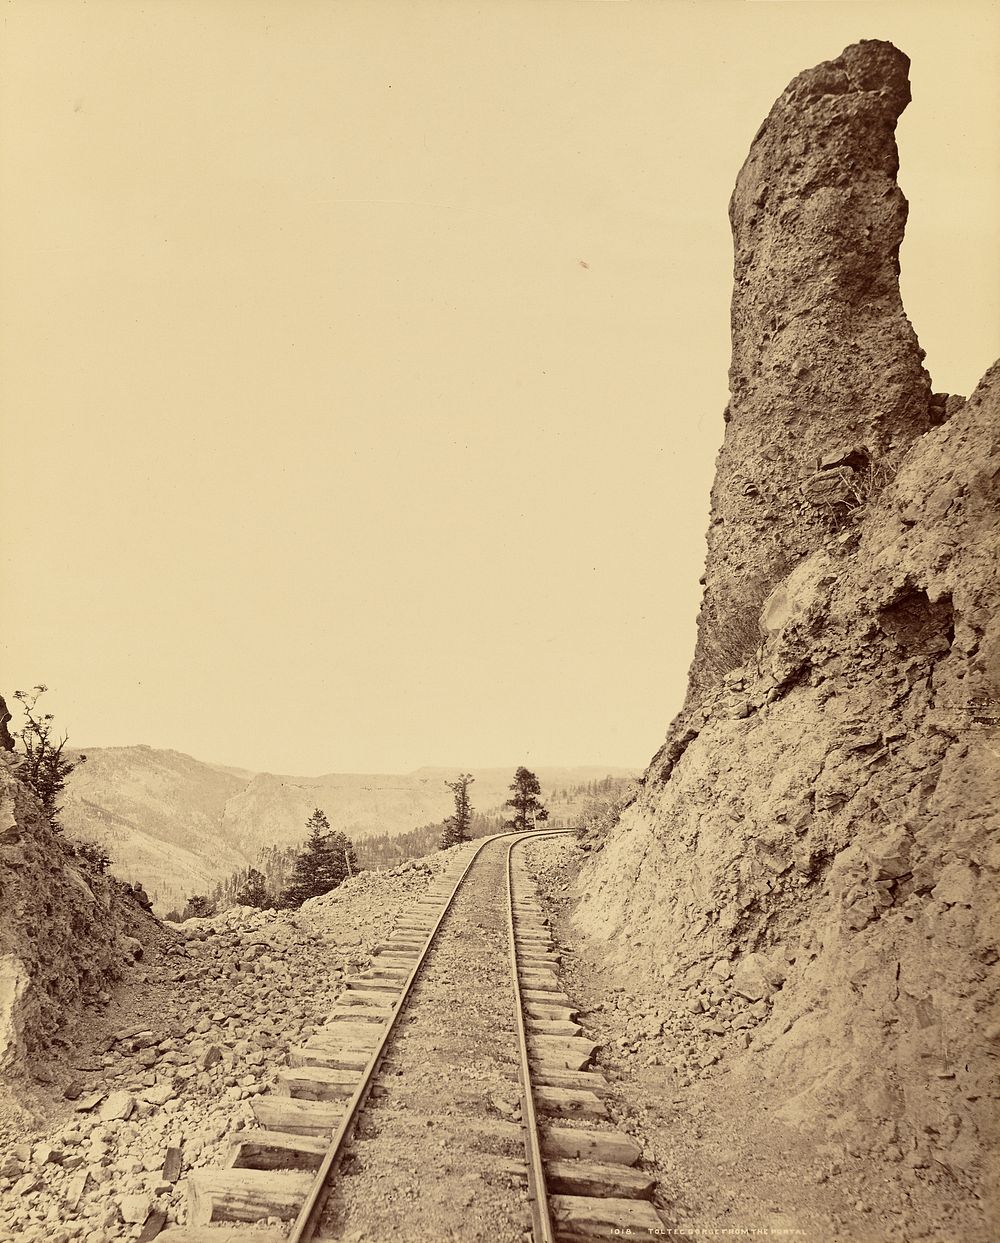 Toltec Gorge from The Portal by William Henry Jackson